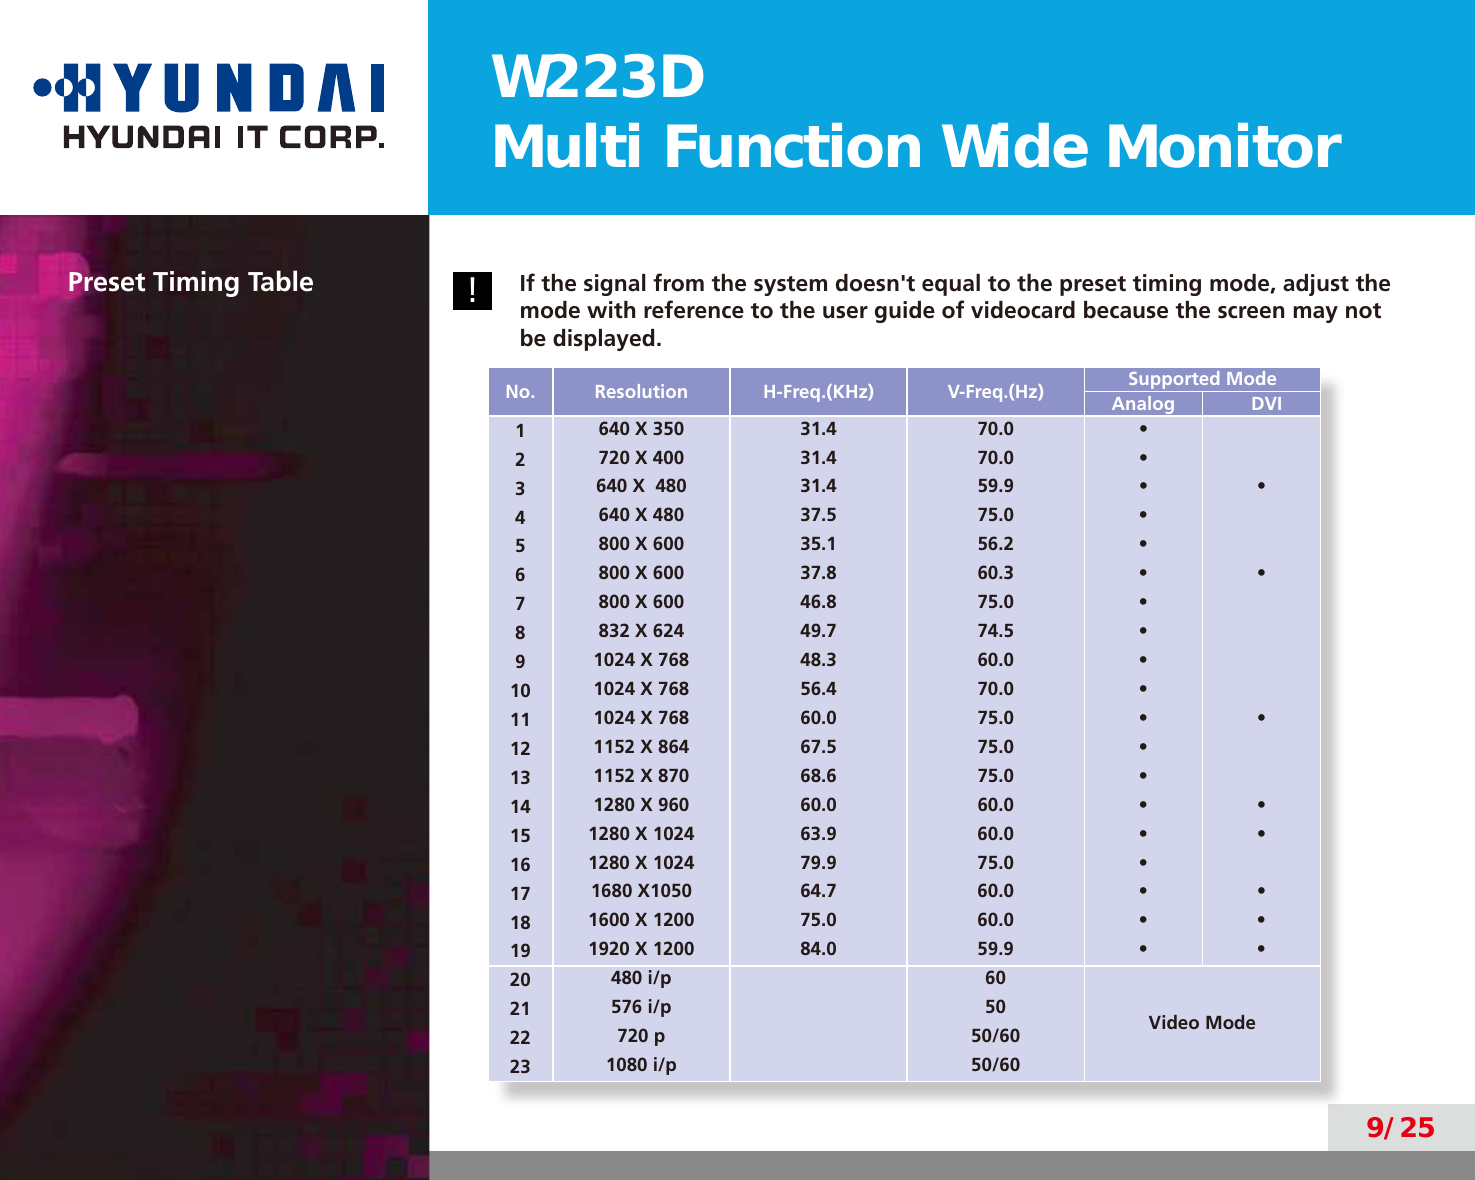 W223DMulti Function Wide Monitor9/25Preset Timing Table!If the signal from the system doesn&apos;t equal to the preset timing mode, adjust the mode with reference to the user guide of videocard because the screen may not be displayed.No. Resolution H-Freq.(KHz) V-Freq.(Hz) Supported ModeAnalog   DVI1640 X 350 31.4 70.0 •2720 X 400 31.4 70.0 •3640 X  480 31.4 59.9 • •4640 X 480 37.5 75.0 •5800 X 600 35.1 56.2 •6800 X 600 37.8 60.3 • •7800 X 600 46.8 75.0 •8832 X 624 49.7 74.5 •91024 X 768 48.3 60.0 •10 1024 X 768 56.4 70.0 •11 1024 X 768 60.0 75.0 • •12 1152 X 864 67.5 75.0 •13 1152 X 870 68.6 75.0 •14 1280 X 960 60.0 60.0 • •15 1280 X 1024 63.9 60.0 • •16 1280 X 1024 79.9 75.0 •17 1680 X1050 64.7 60.0 • •18 1600 X 1200 75.0 60.0 • •19 1920 X 1200 84.0 59.9 • •20 480 i/p 60Video Mode21 576 i/p 5022 720 p 50/6023 1080 i/p 50/60